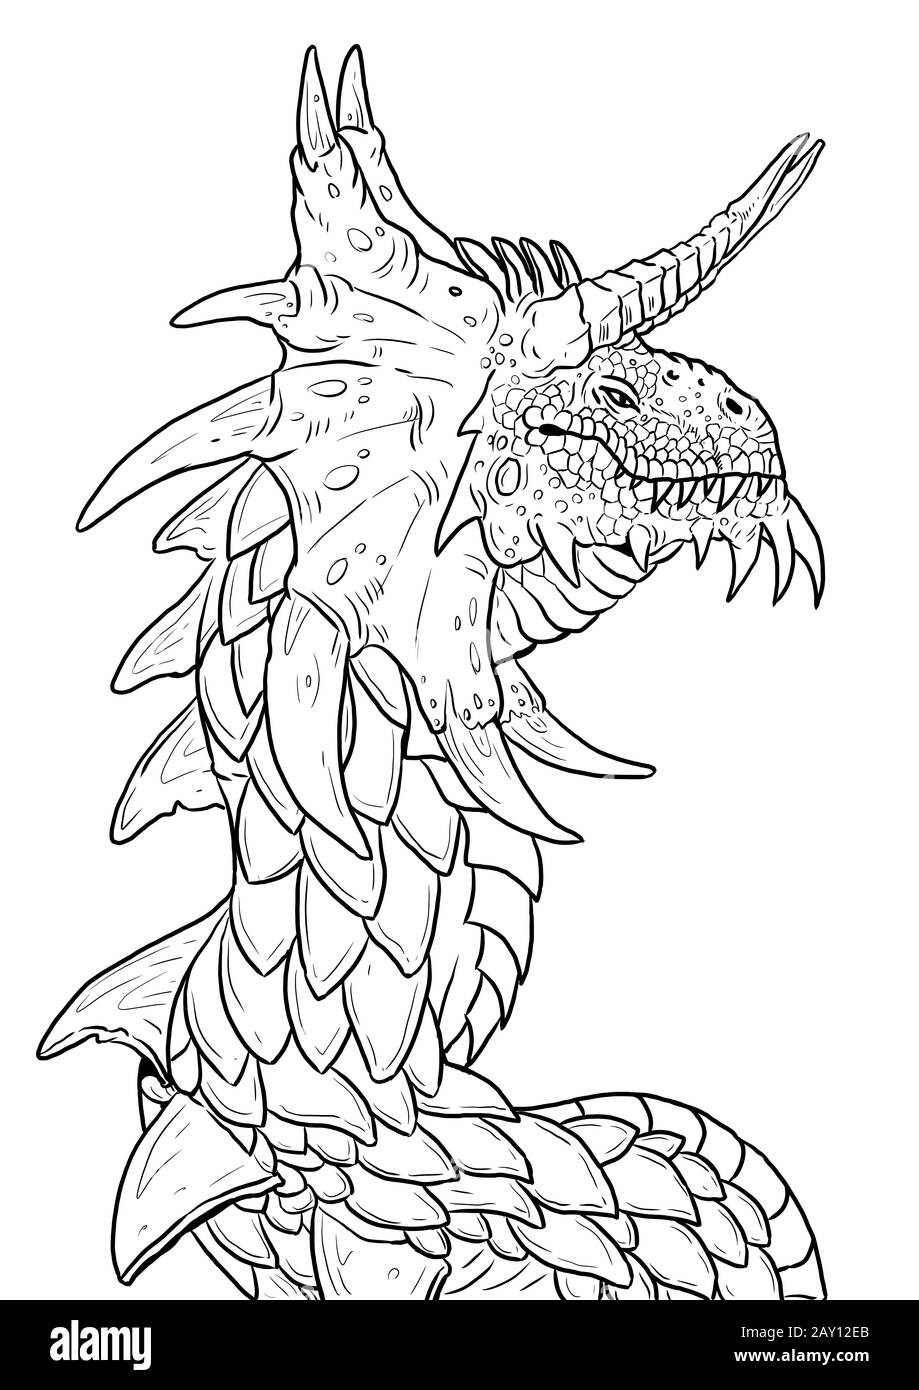 Dragon coloring page. Outline illustration. Dragon drawing coloring sheet. Stock Photo